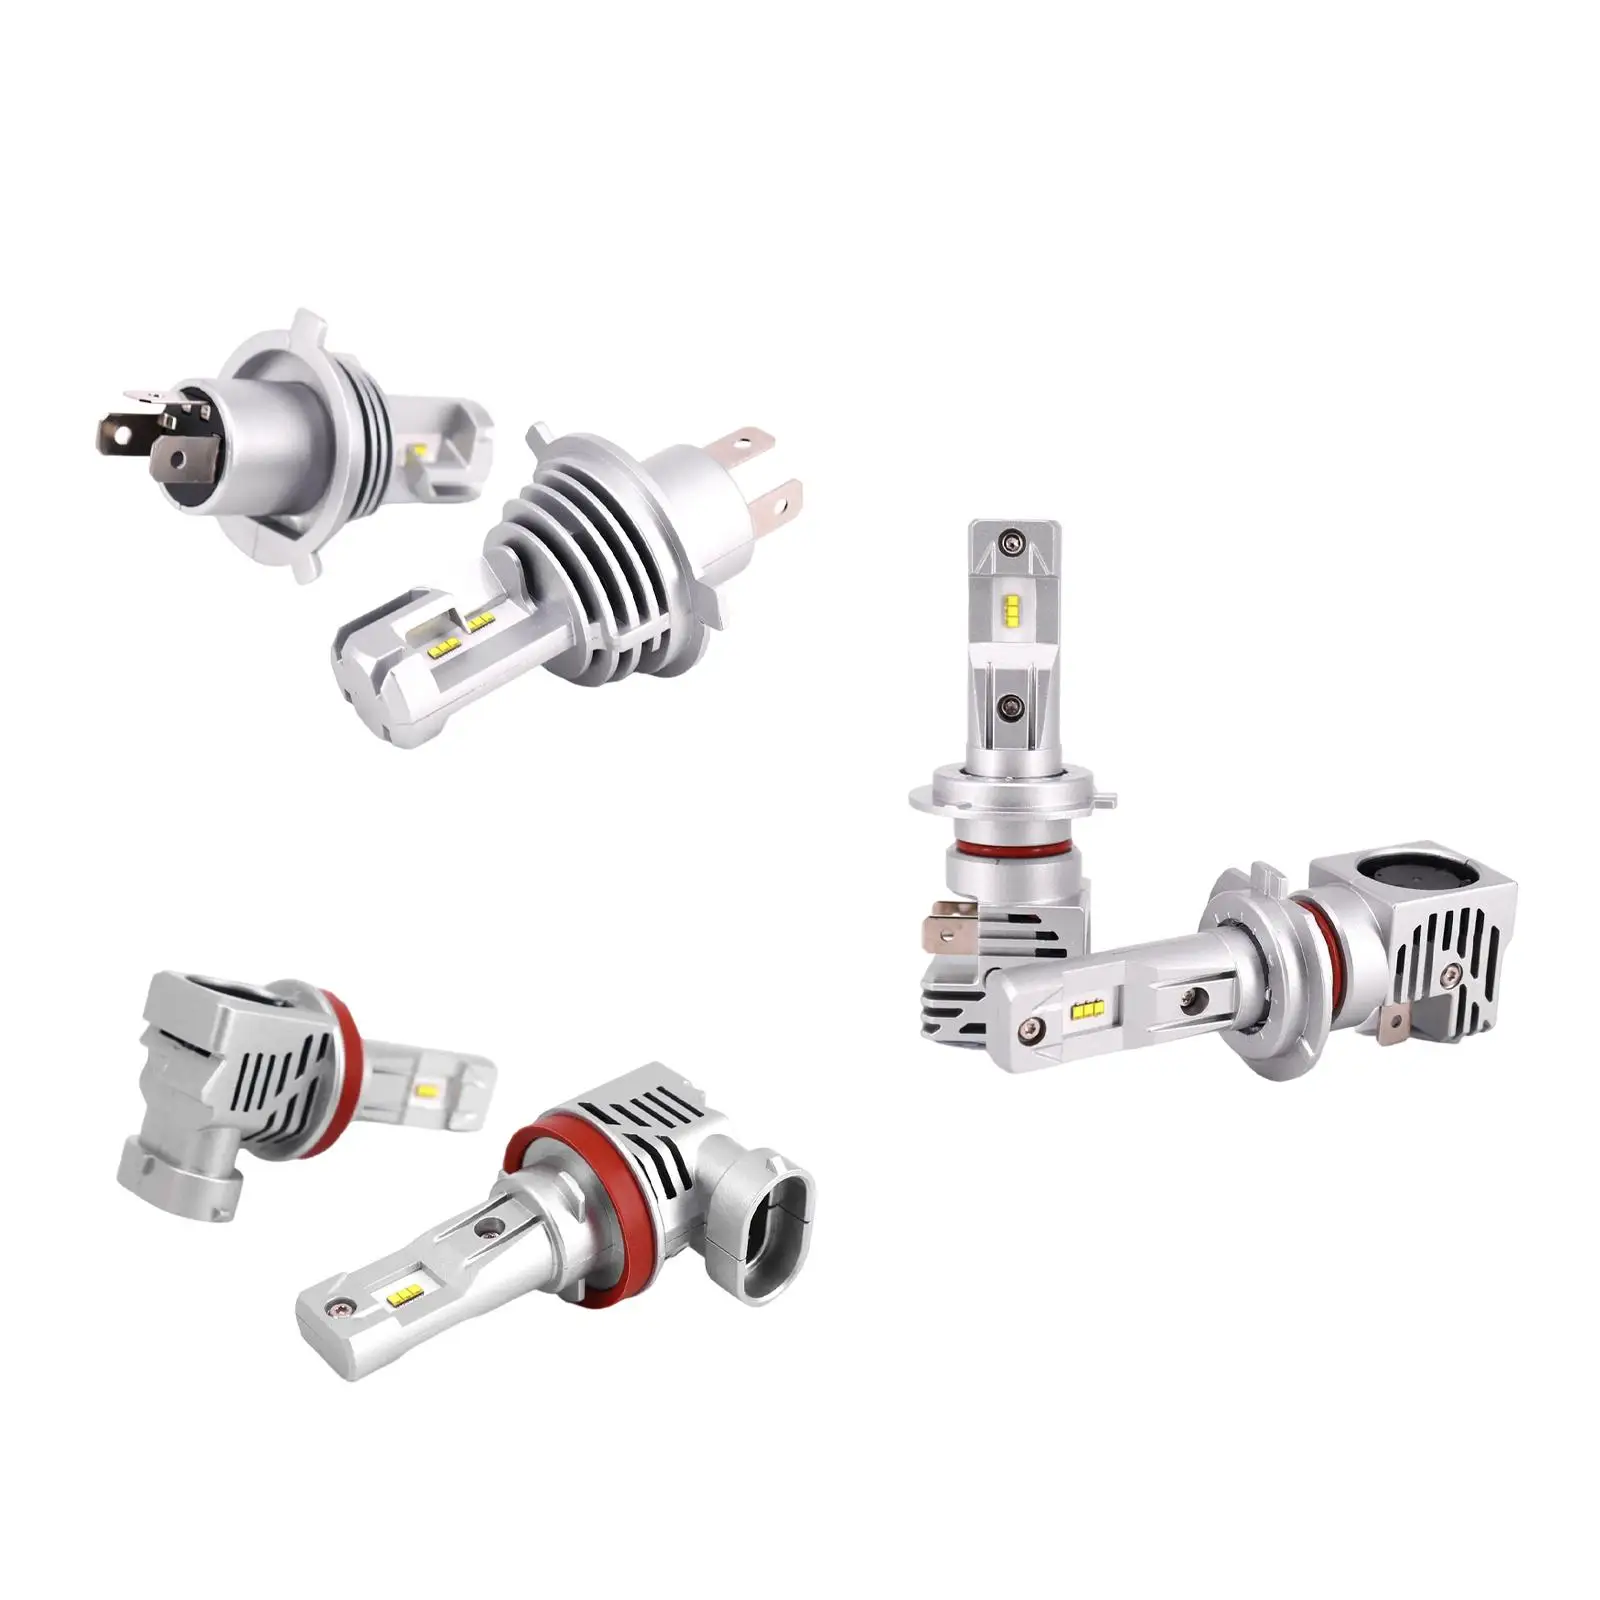 2 Pieces Bulbs IP65 Waterproof Super for Auto